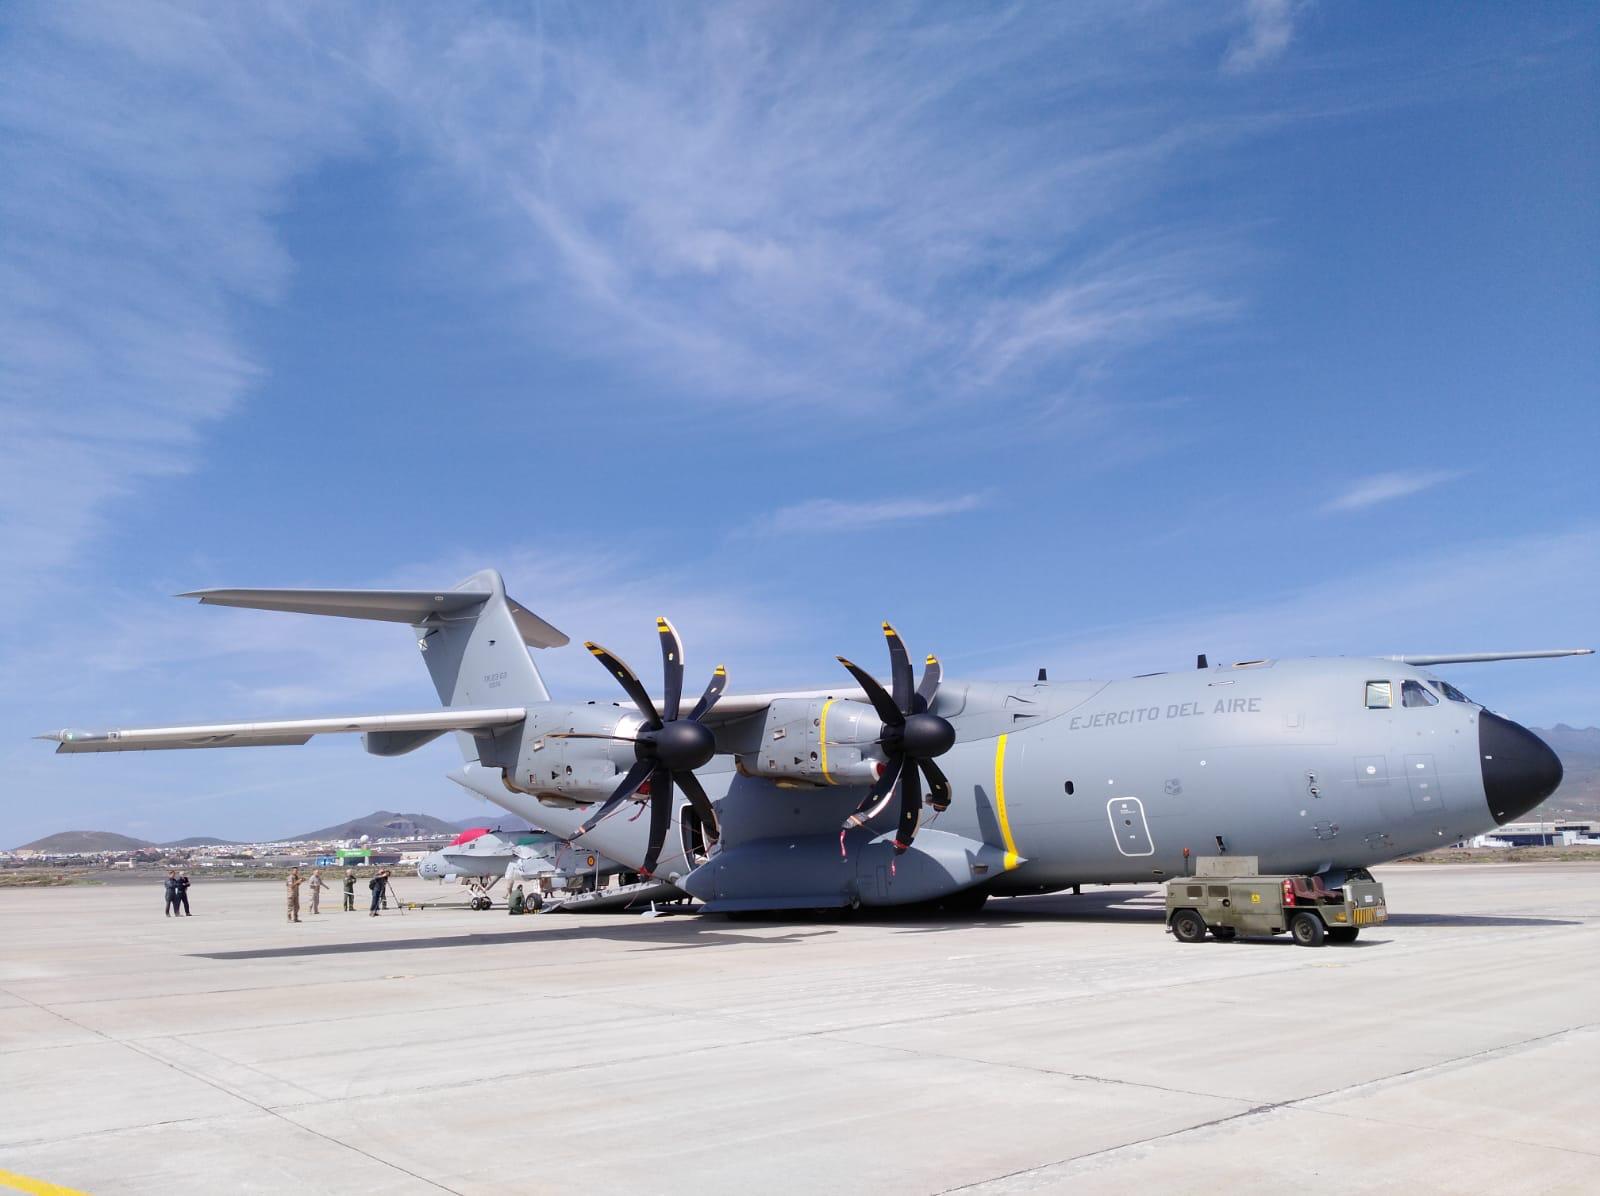 A Spanish A400M carried a large passenger!